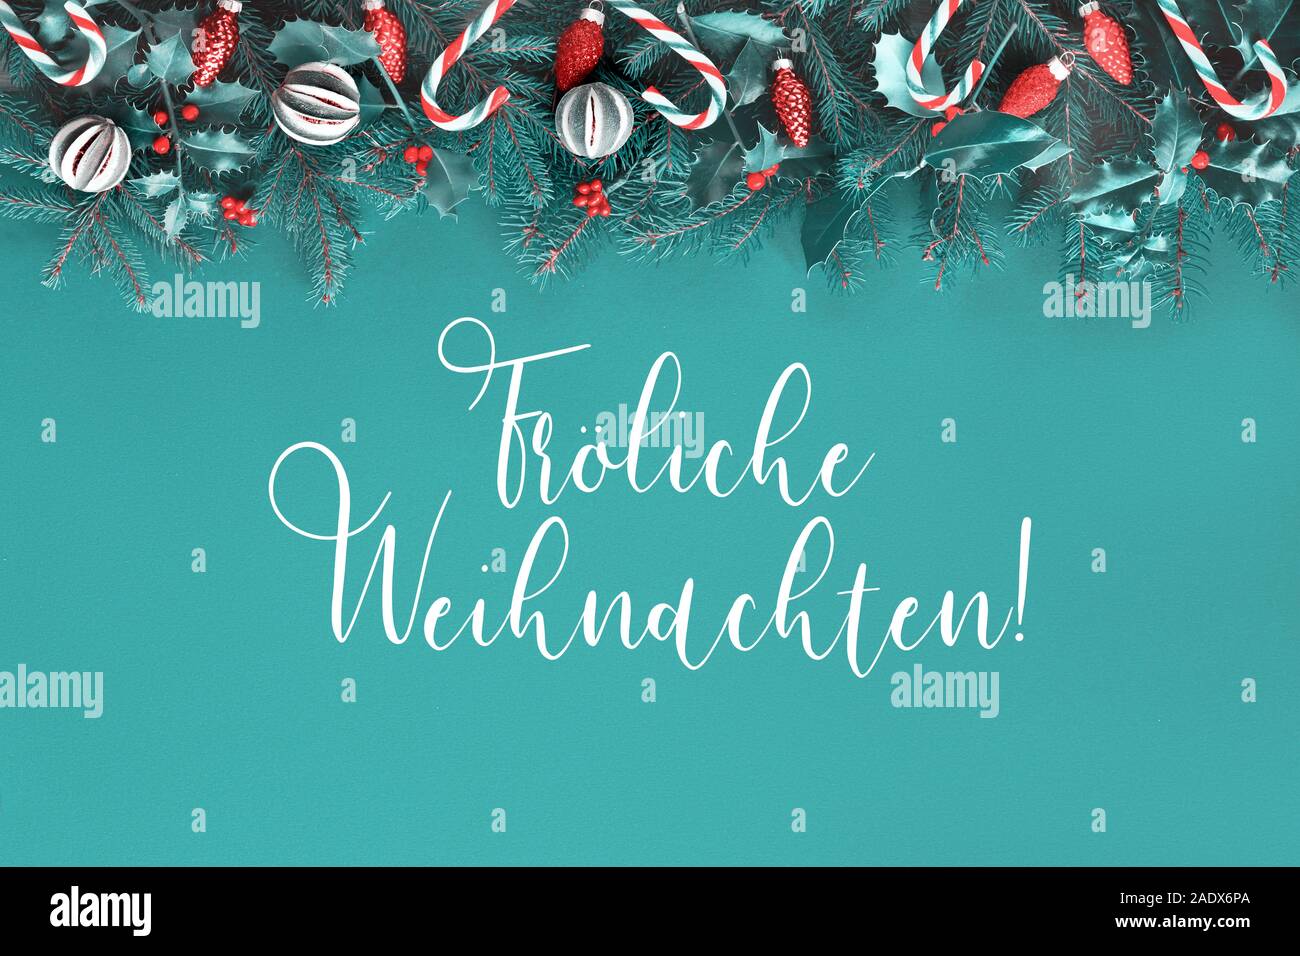 Text "Frohliche Weihnachten" in German that means "Happy Christmas". Xmas flat lay on green paper with red decorations. Natural fir and holly twigs de Stock Photo